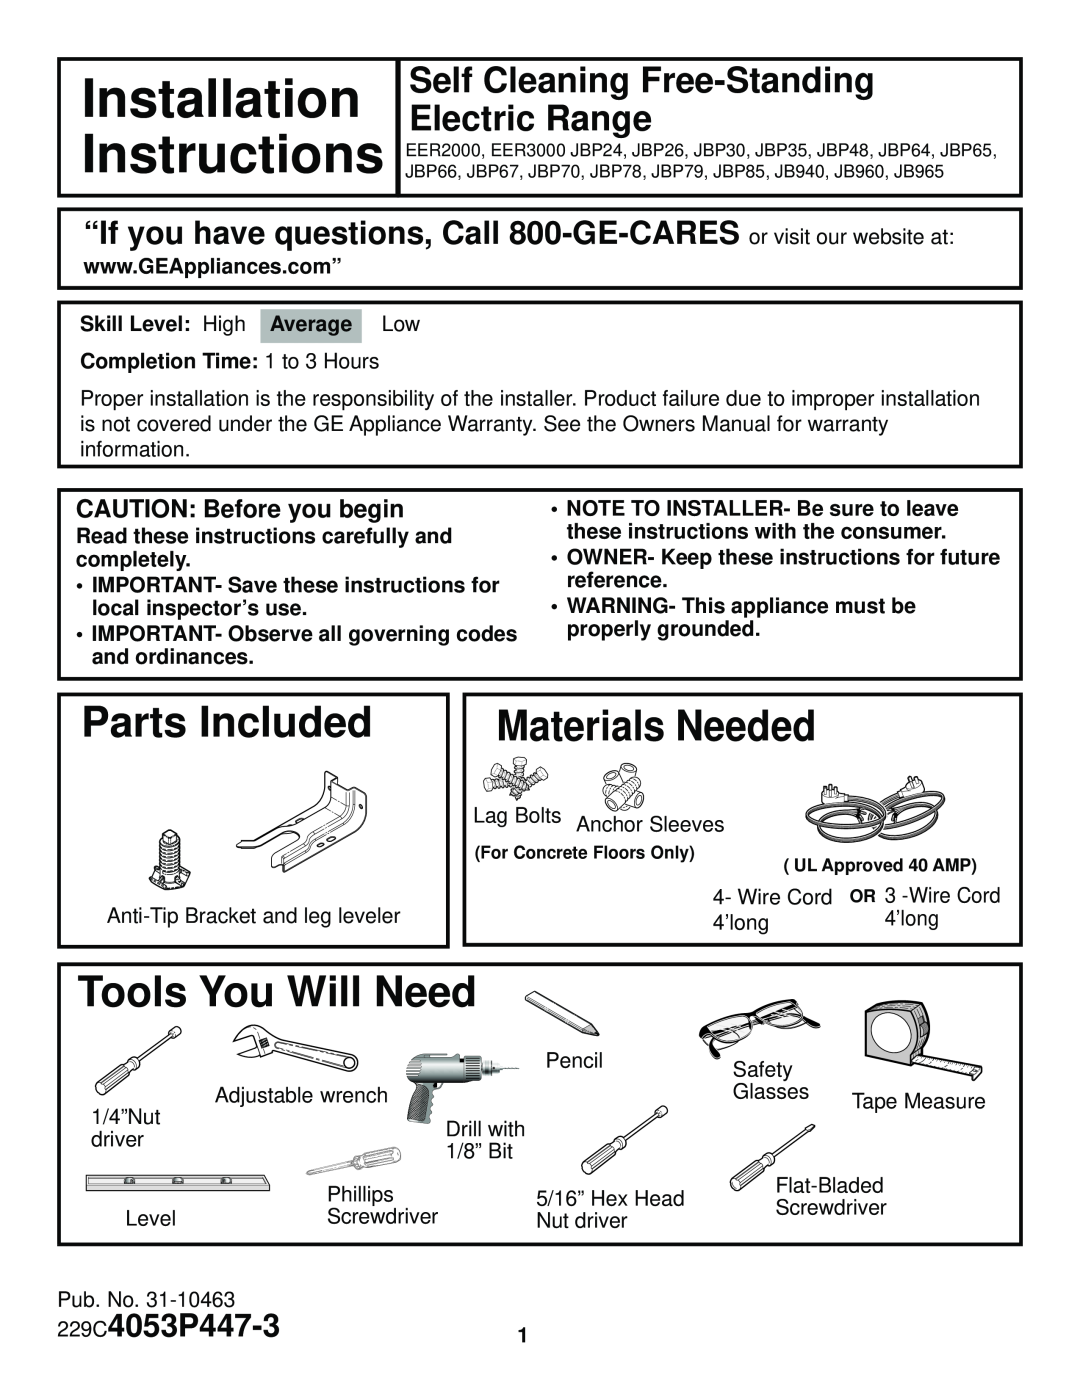 GE 31-10463 installation instructions Installation, Instructions, Parts Included, Materials Needed, Tools You Will Need 